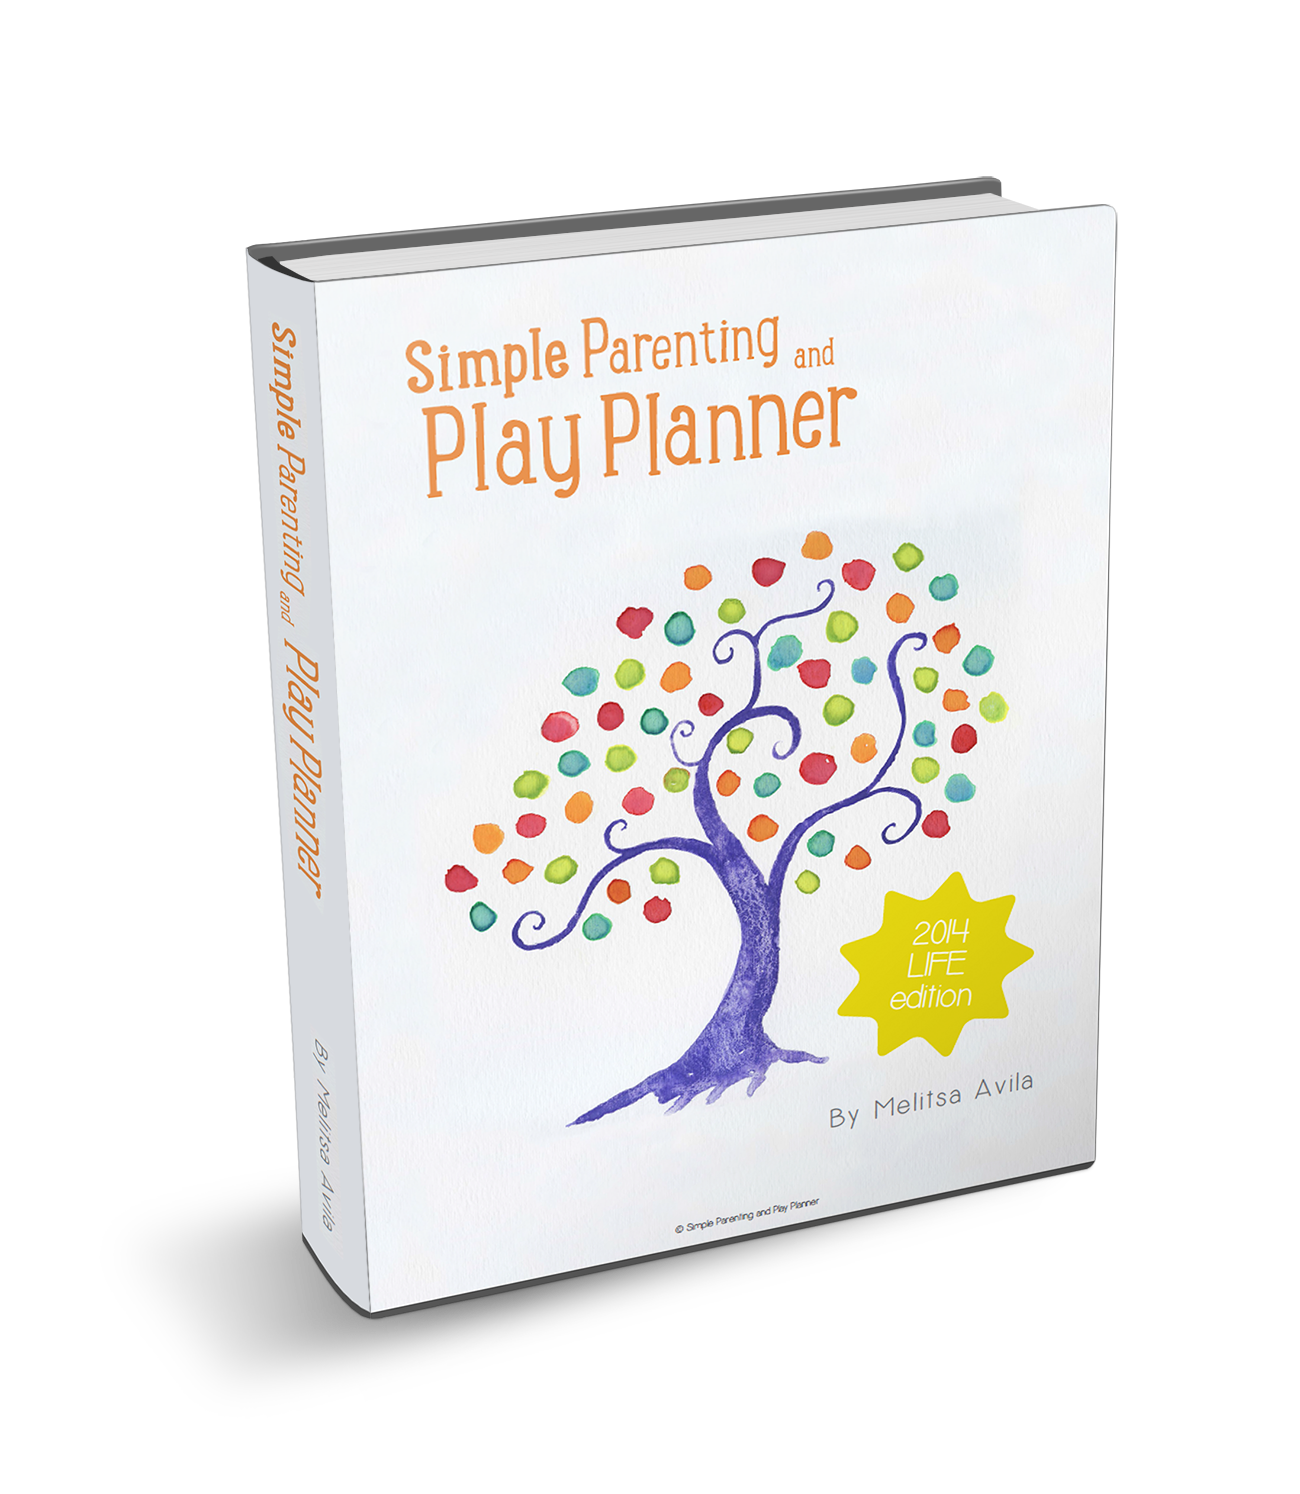 Simple Parenting and Play planner